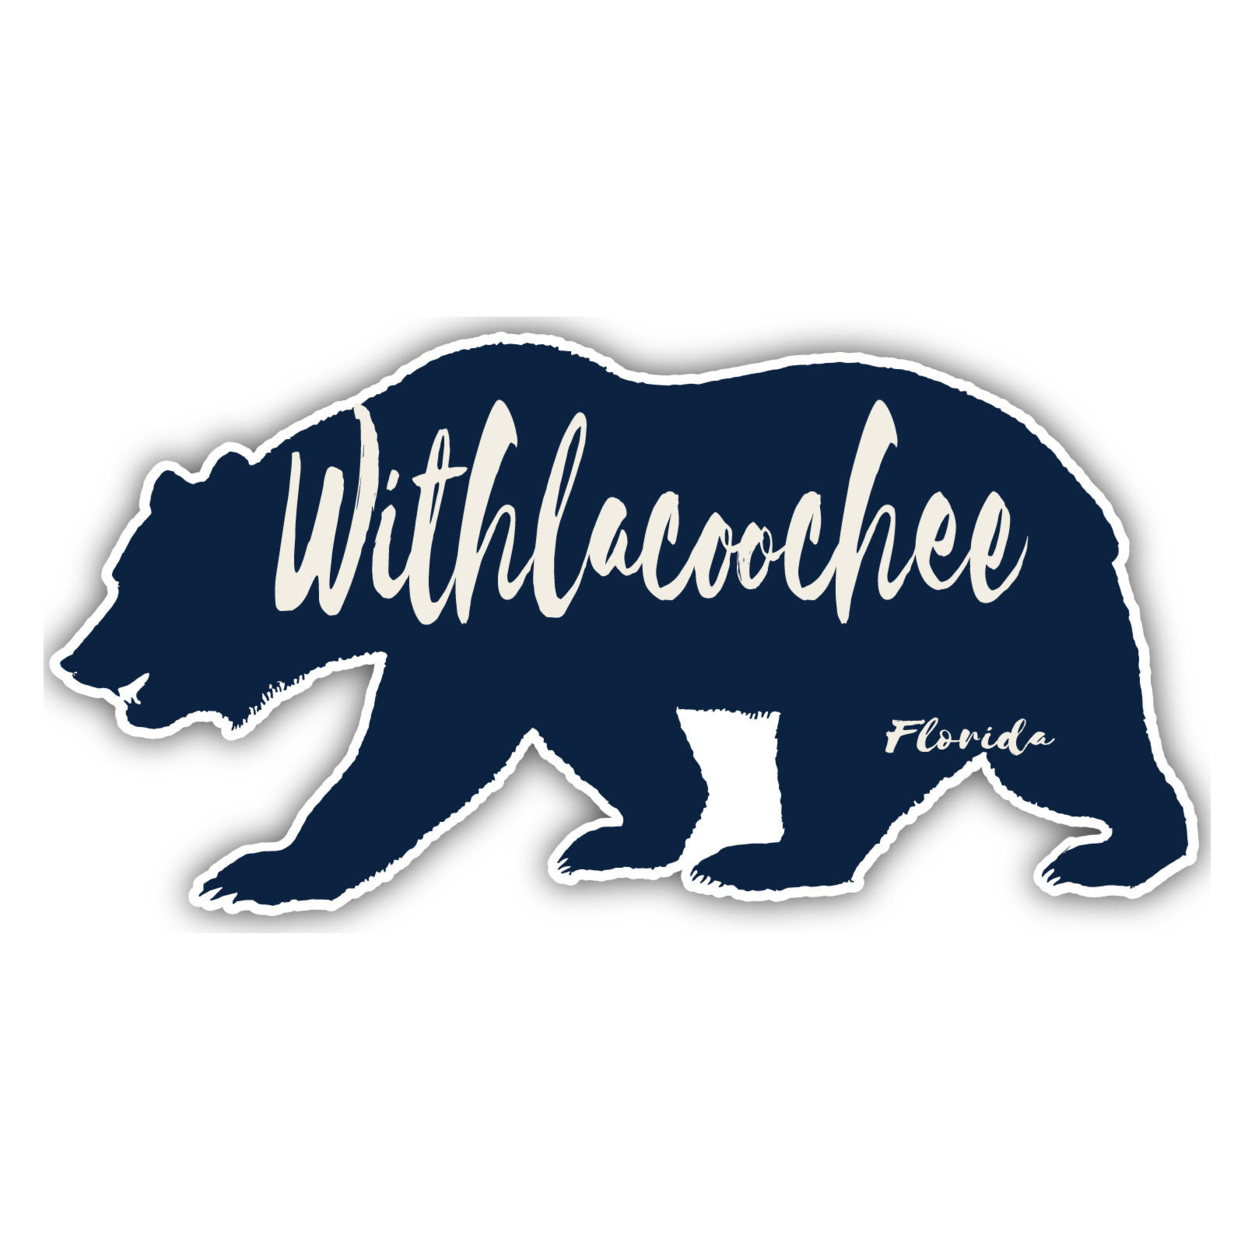 Withlacoochee Florida Souvenir Decorative Stickers (Choose Theme And Size) - Single Unit, 4-Inch, Bear